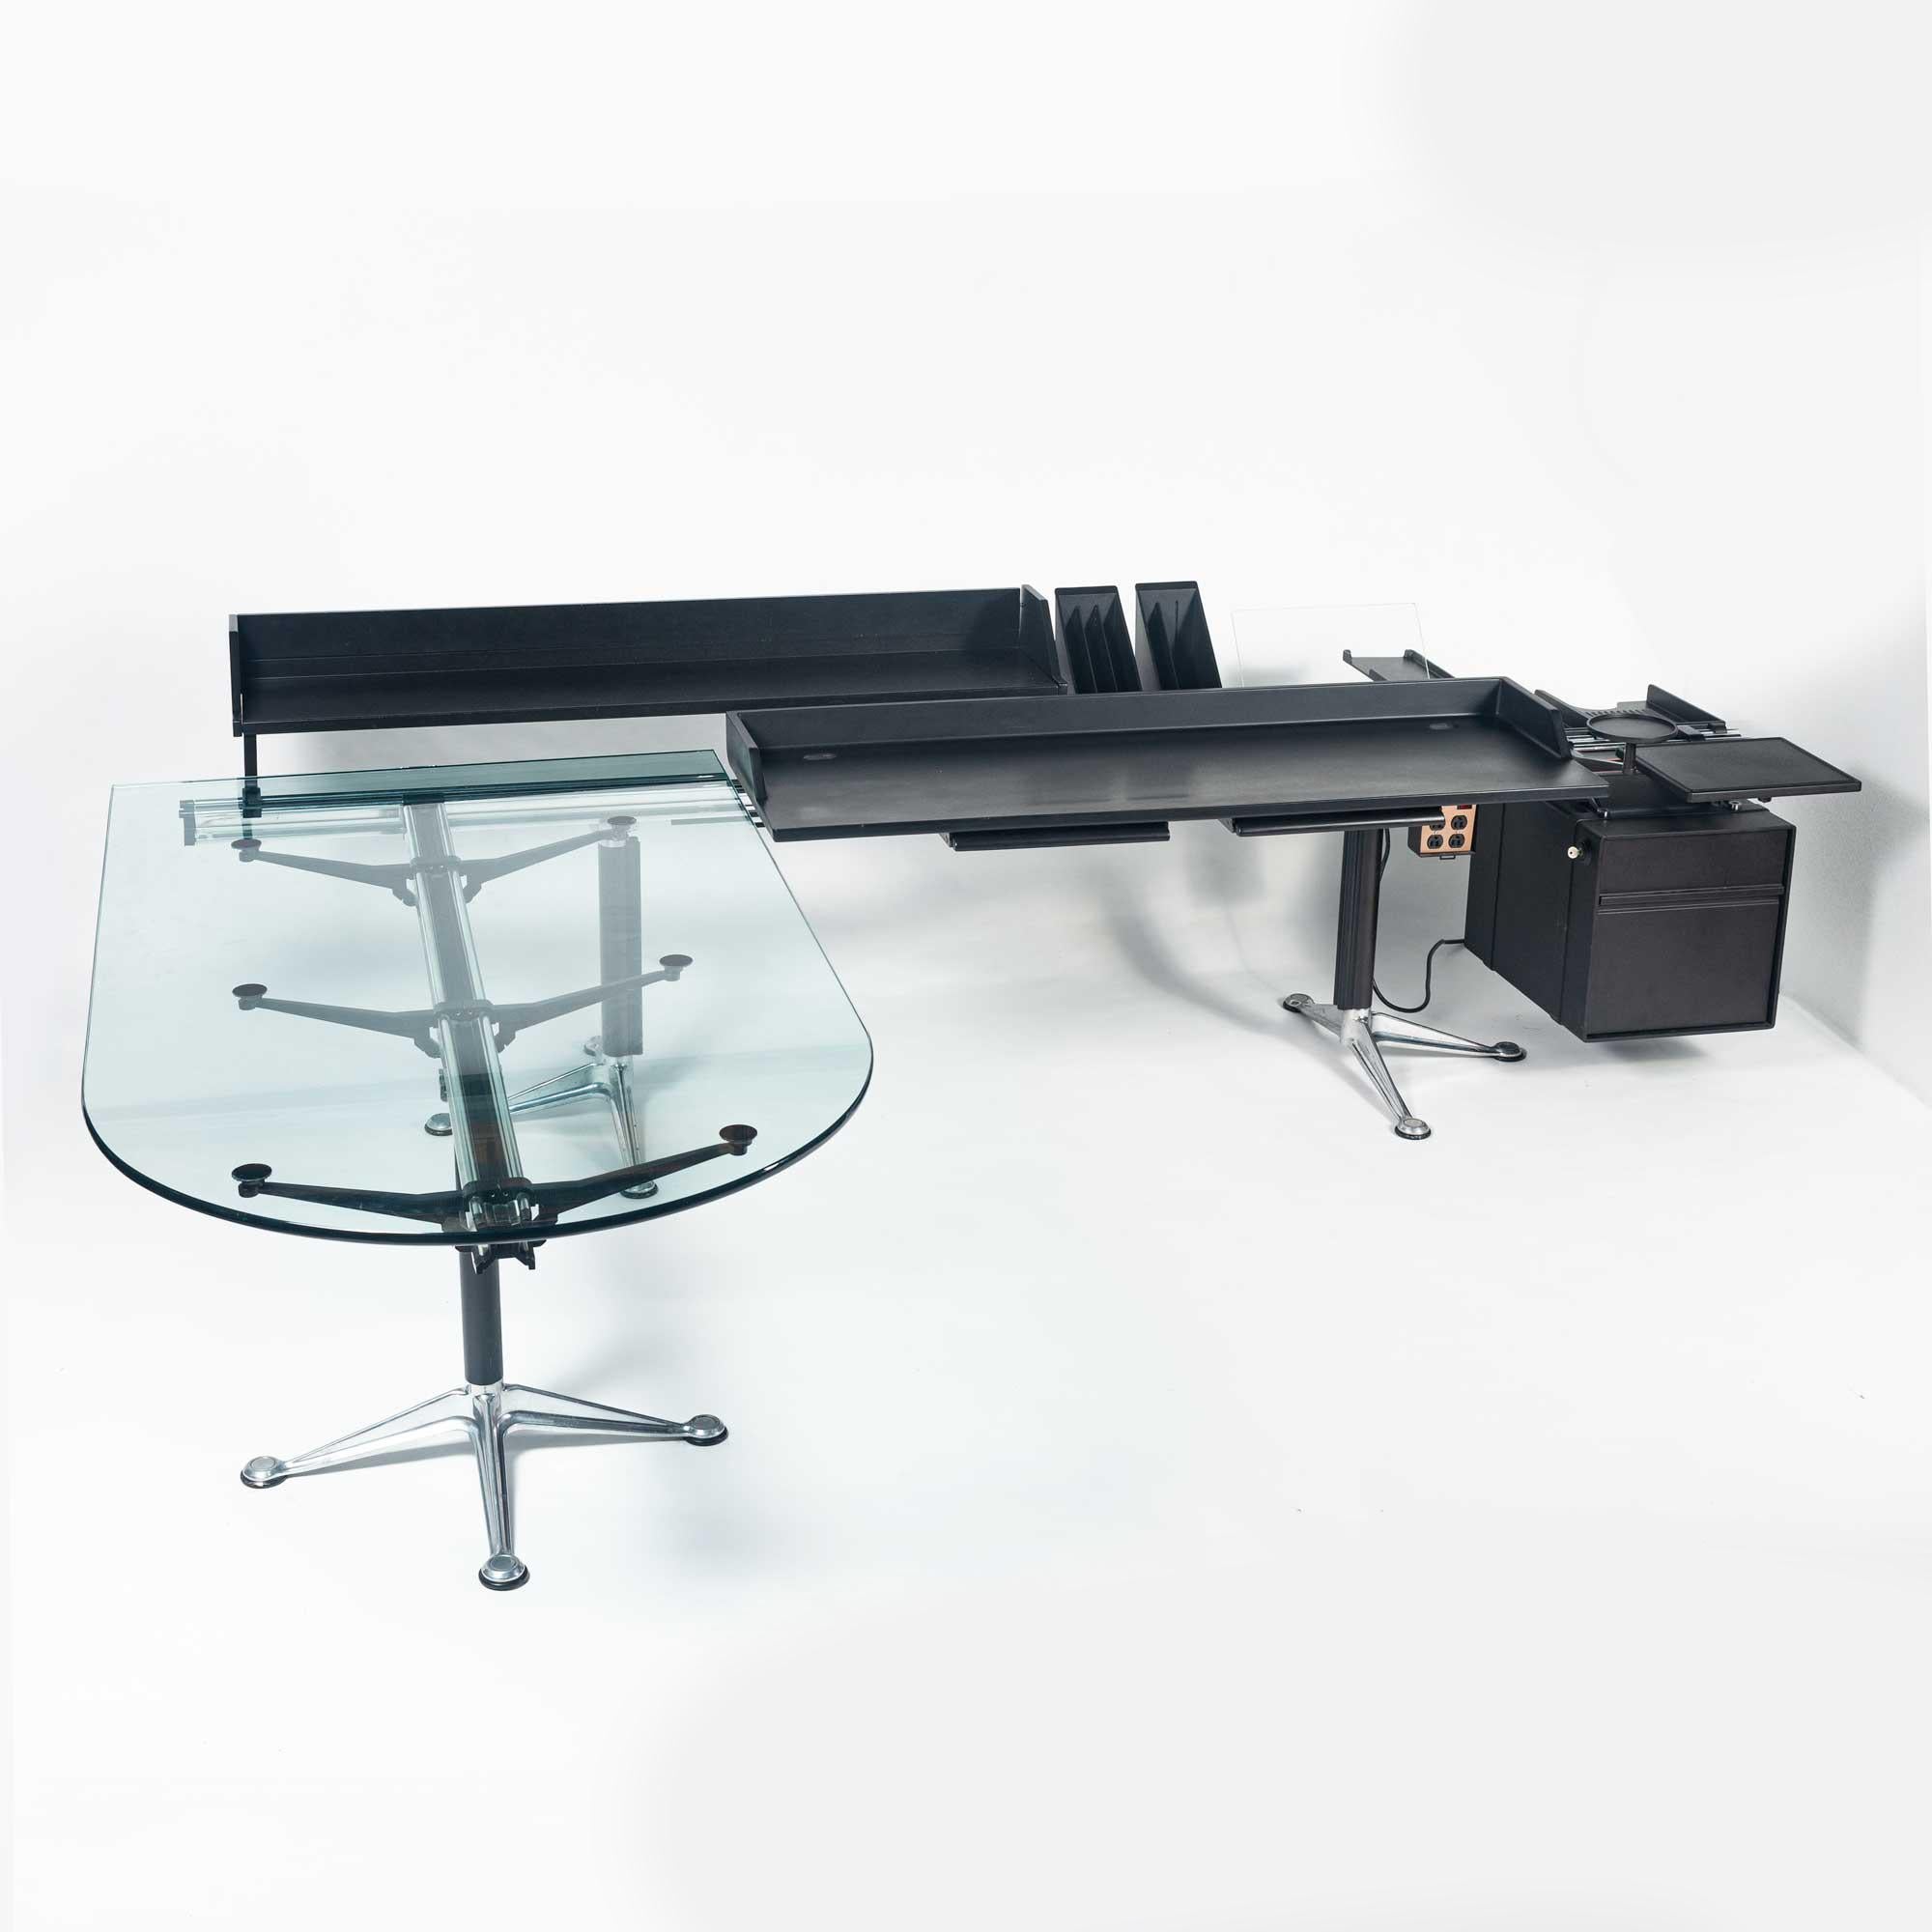 According to the Herman Miller website, Bruce’s first product designed for HM was the “Burdick Group system,” a highly configurable office desk which integrated electronics for office equipment and early computers.

This rare Bruce Burdick